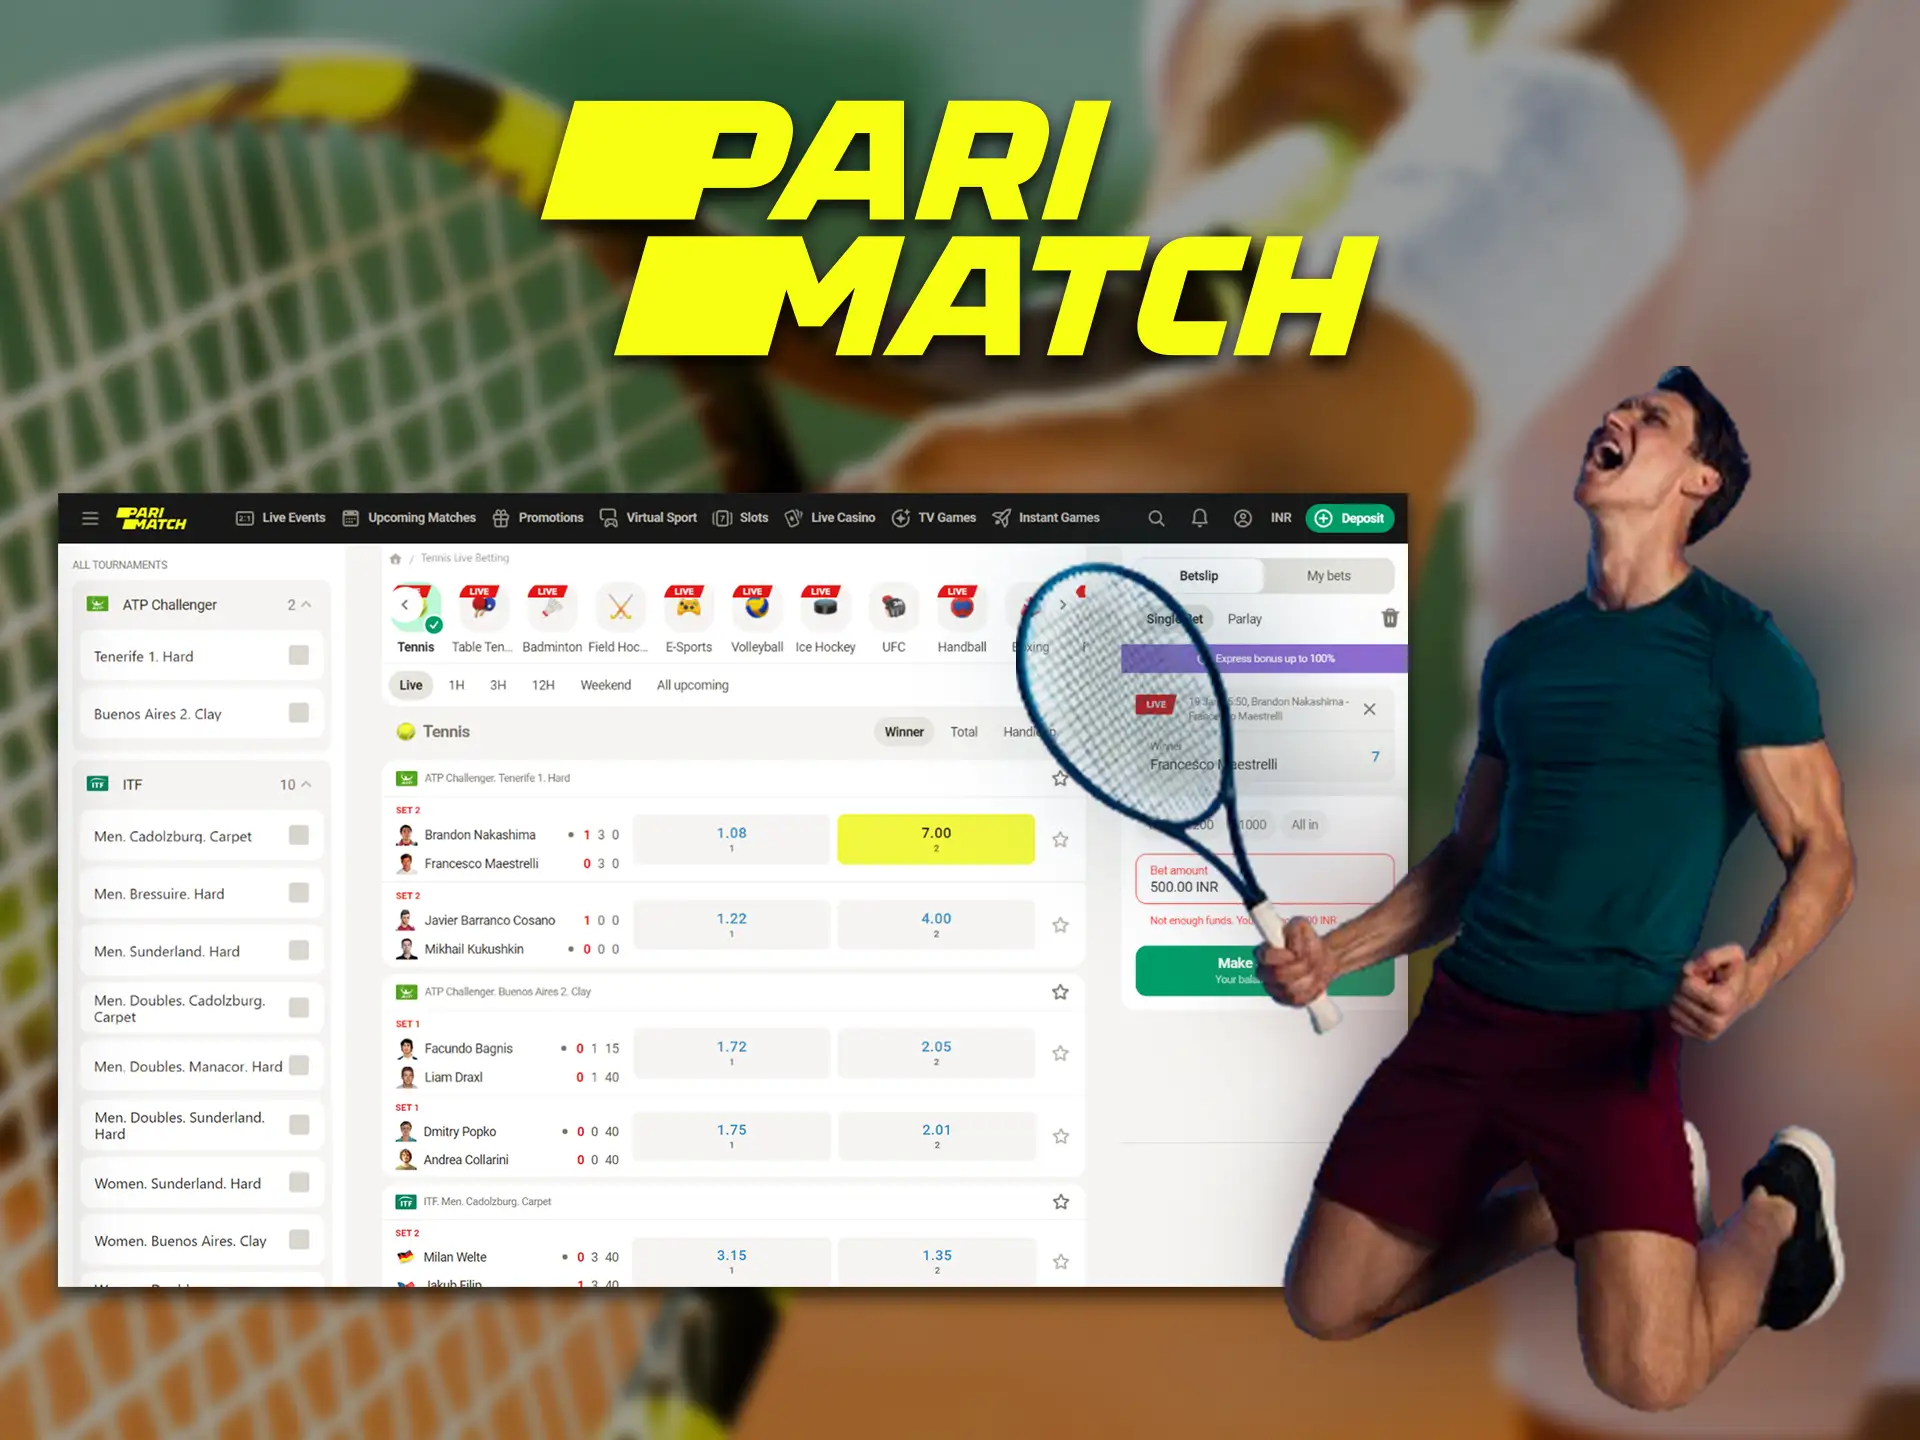 Live tennis betting is available at Parimatch.